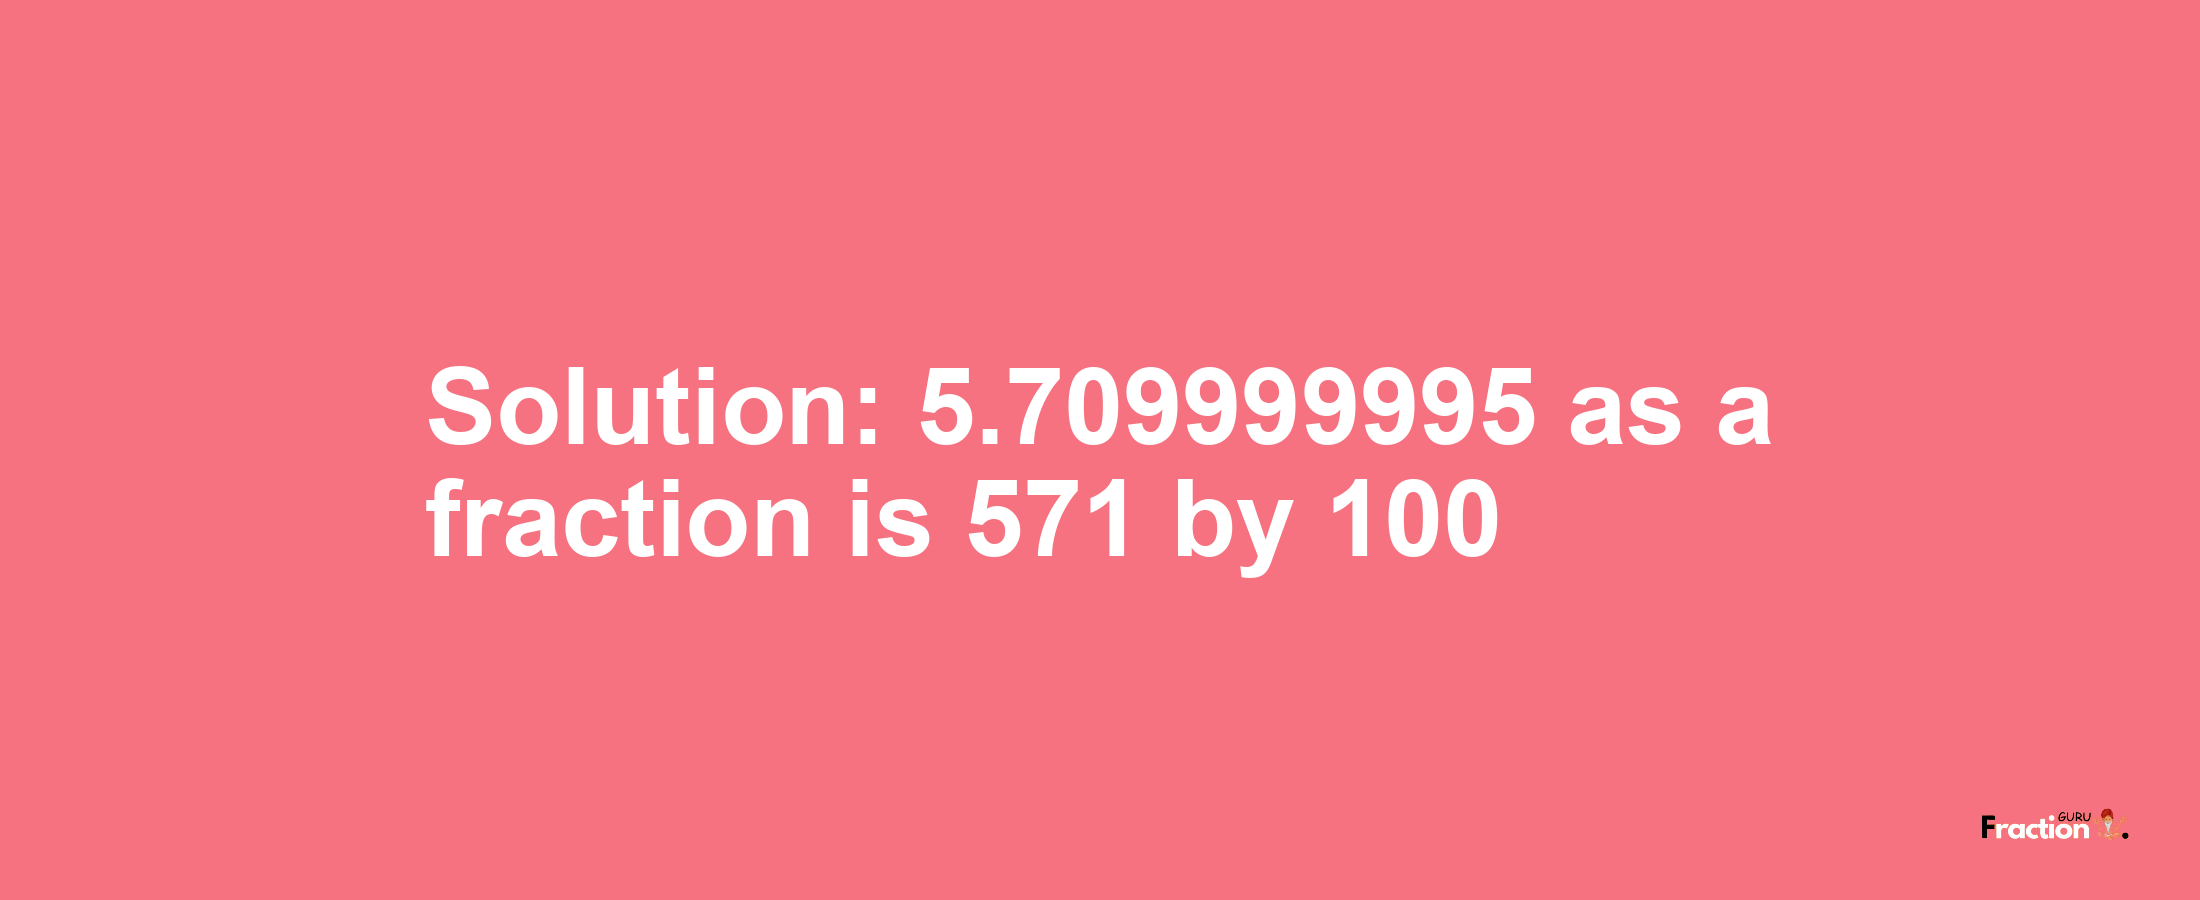 Solution:5.709999995 as a fraction is 571/100